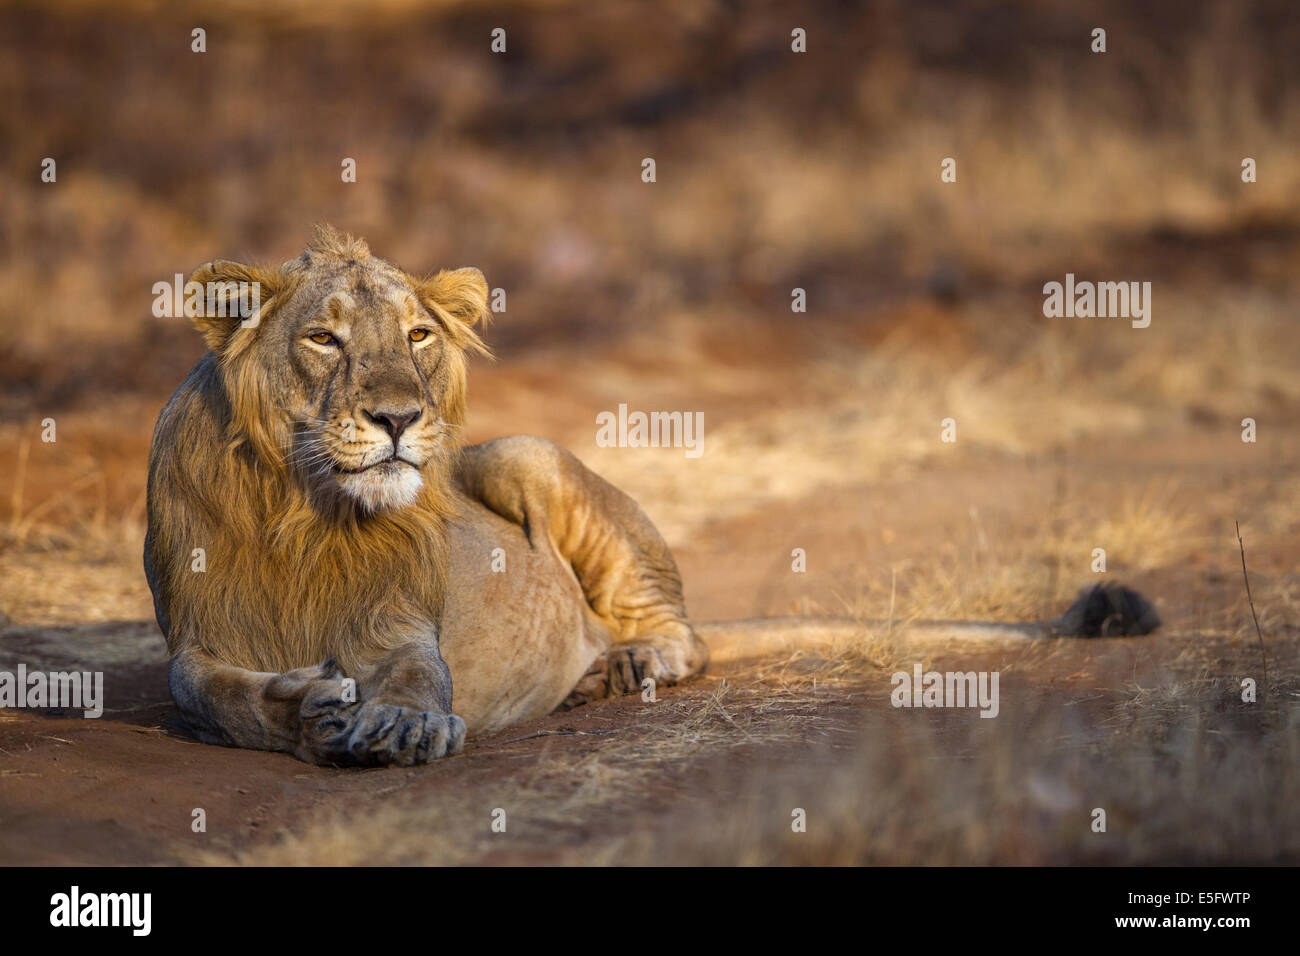 I Lions asiatico (Panthera leo persica) in GIR forest, Gujarat, India. Foto Stock